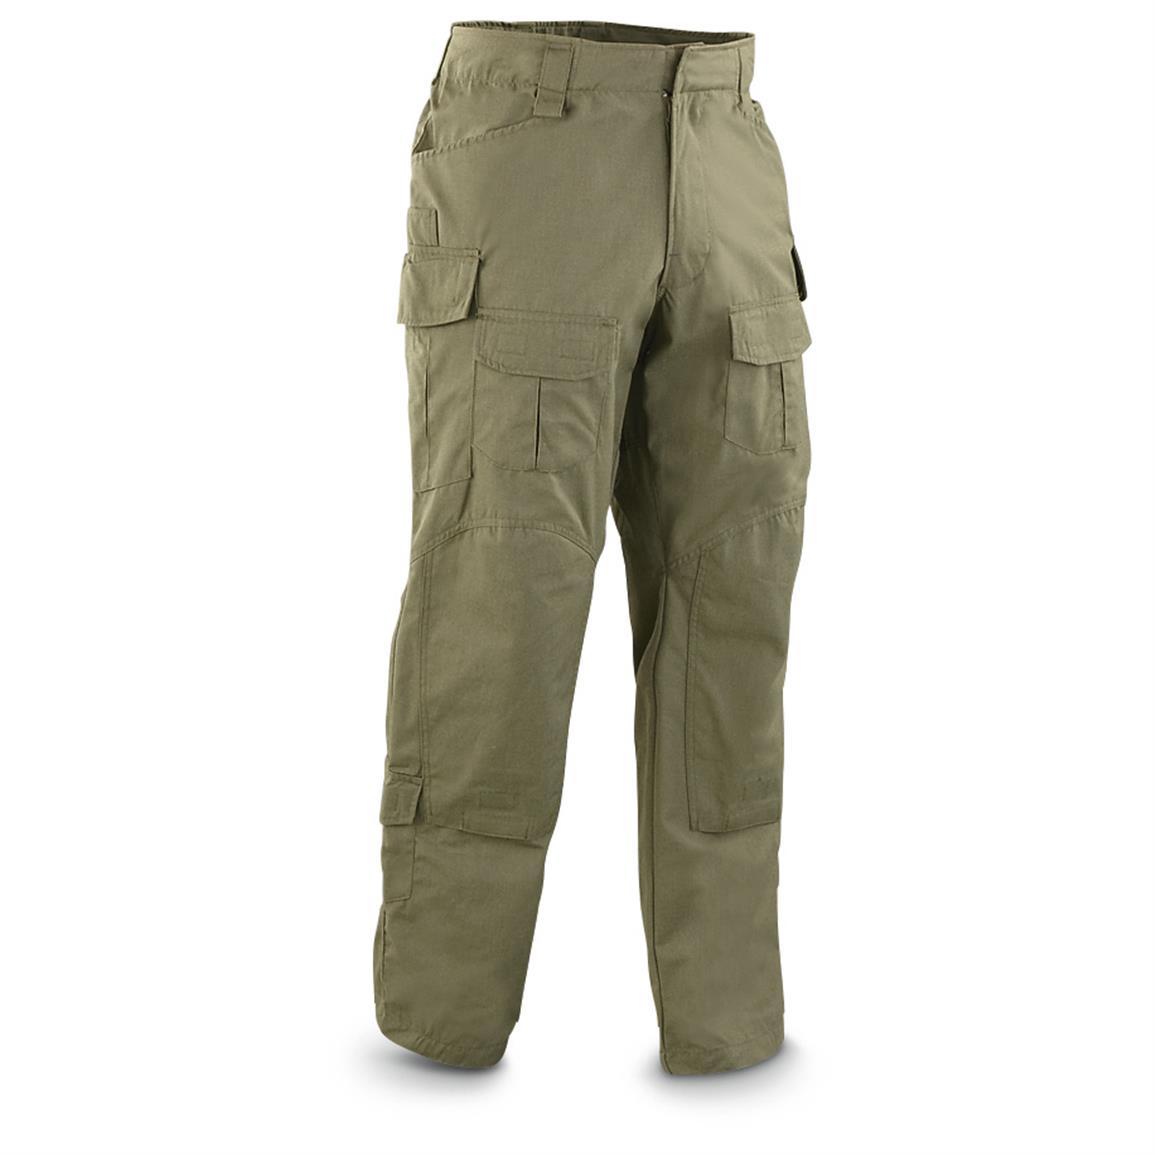 New USMC Nyco Ripstop All-weather Field Pants - 622990, Pants at ...